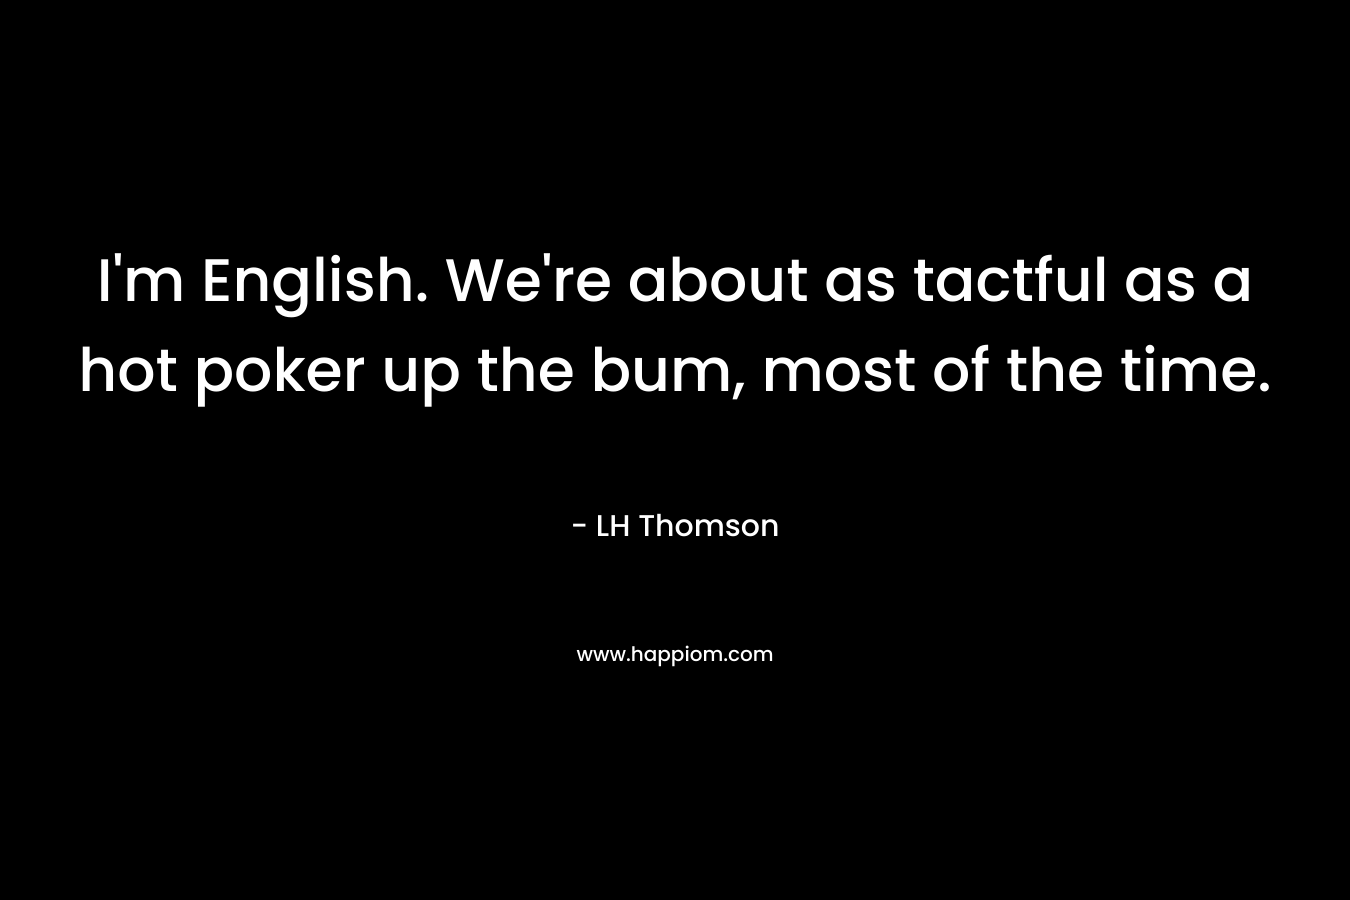 I’m English. We’re about as tactful as a hot poker up the bum, most of the time. – LH Thomson